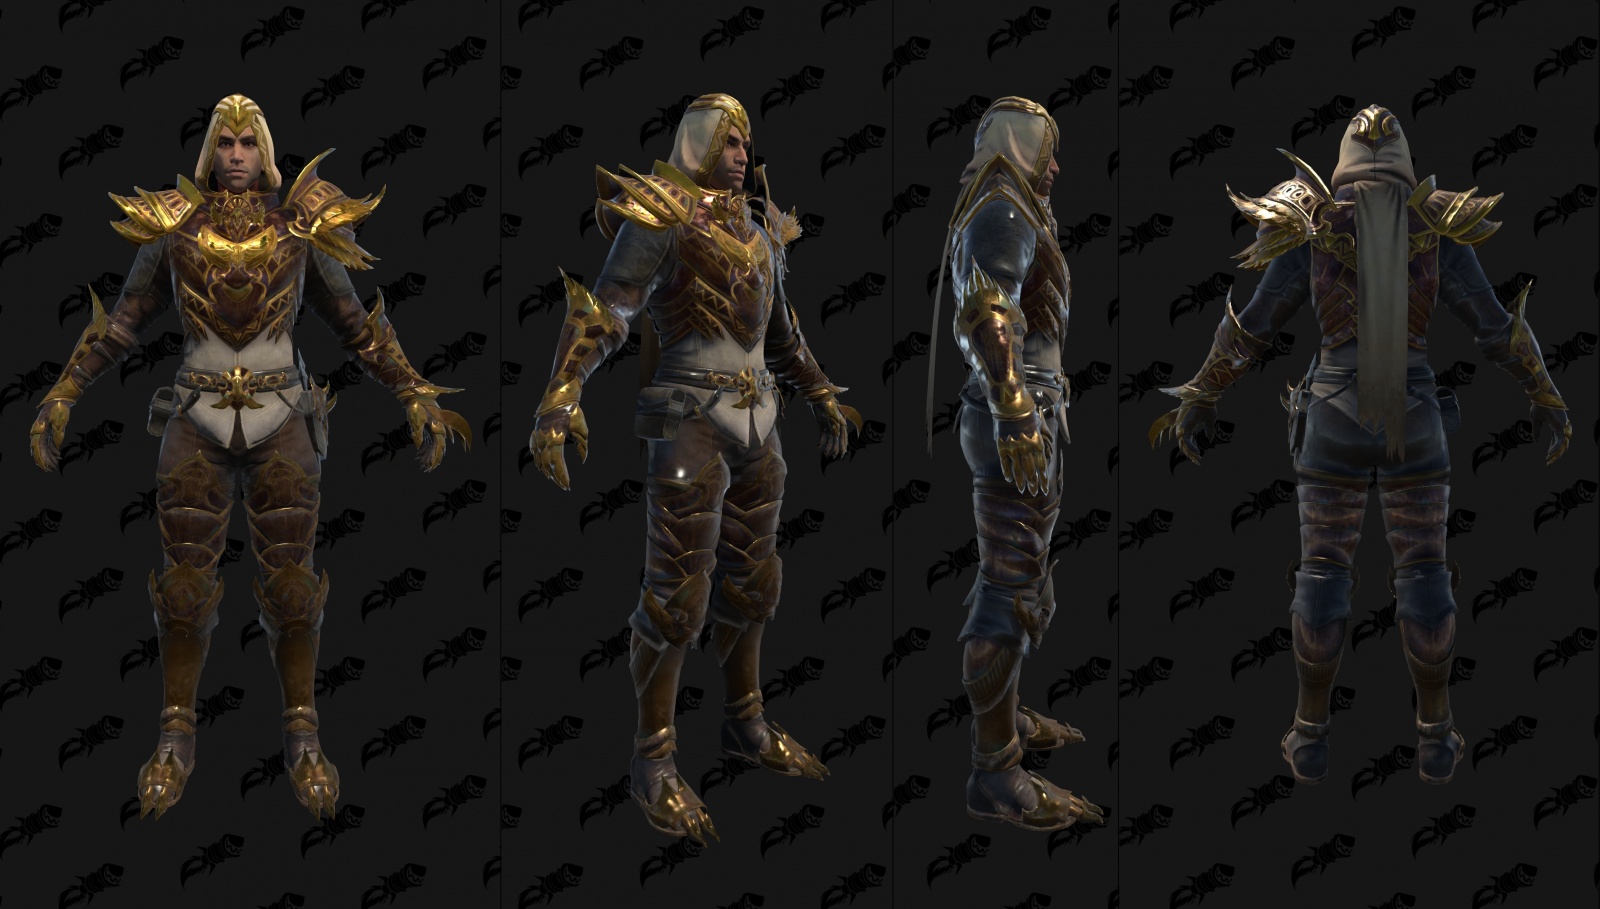 Wowhead - Next up in Diablo Immortal datamining, we're